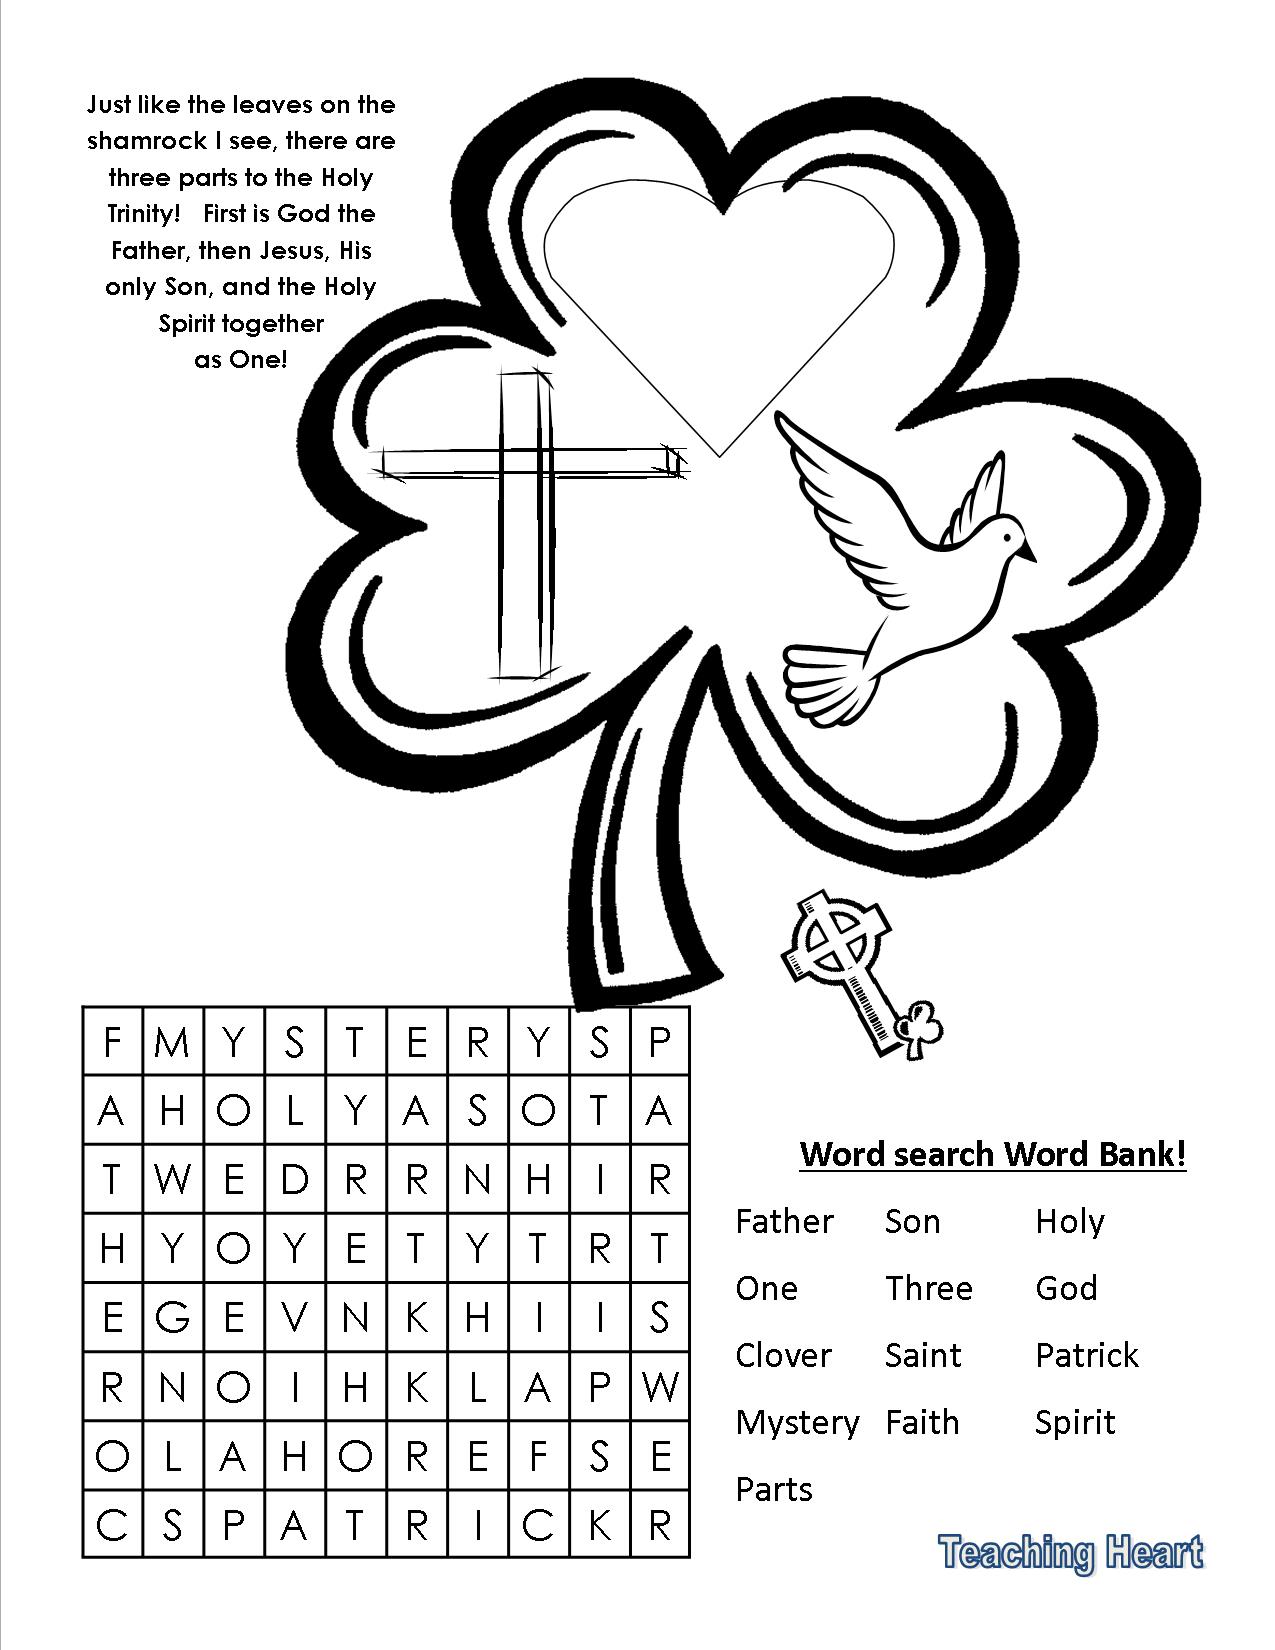 ulysses nyc st patricks day coloring pages - photo #24